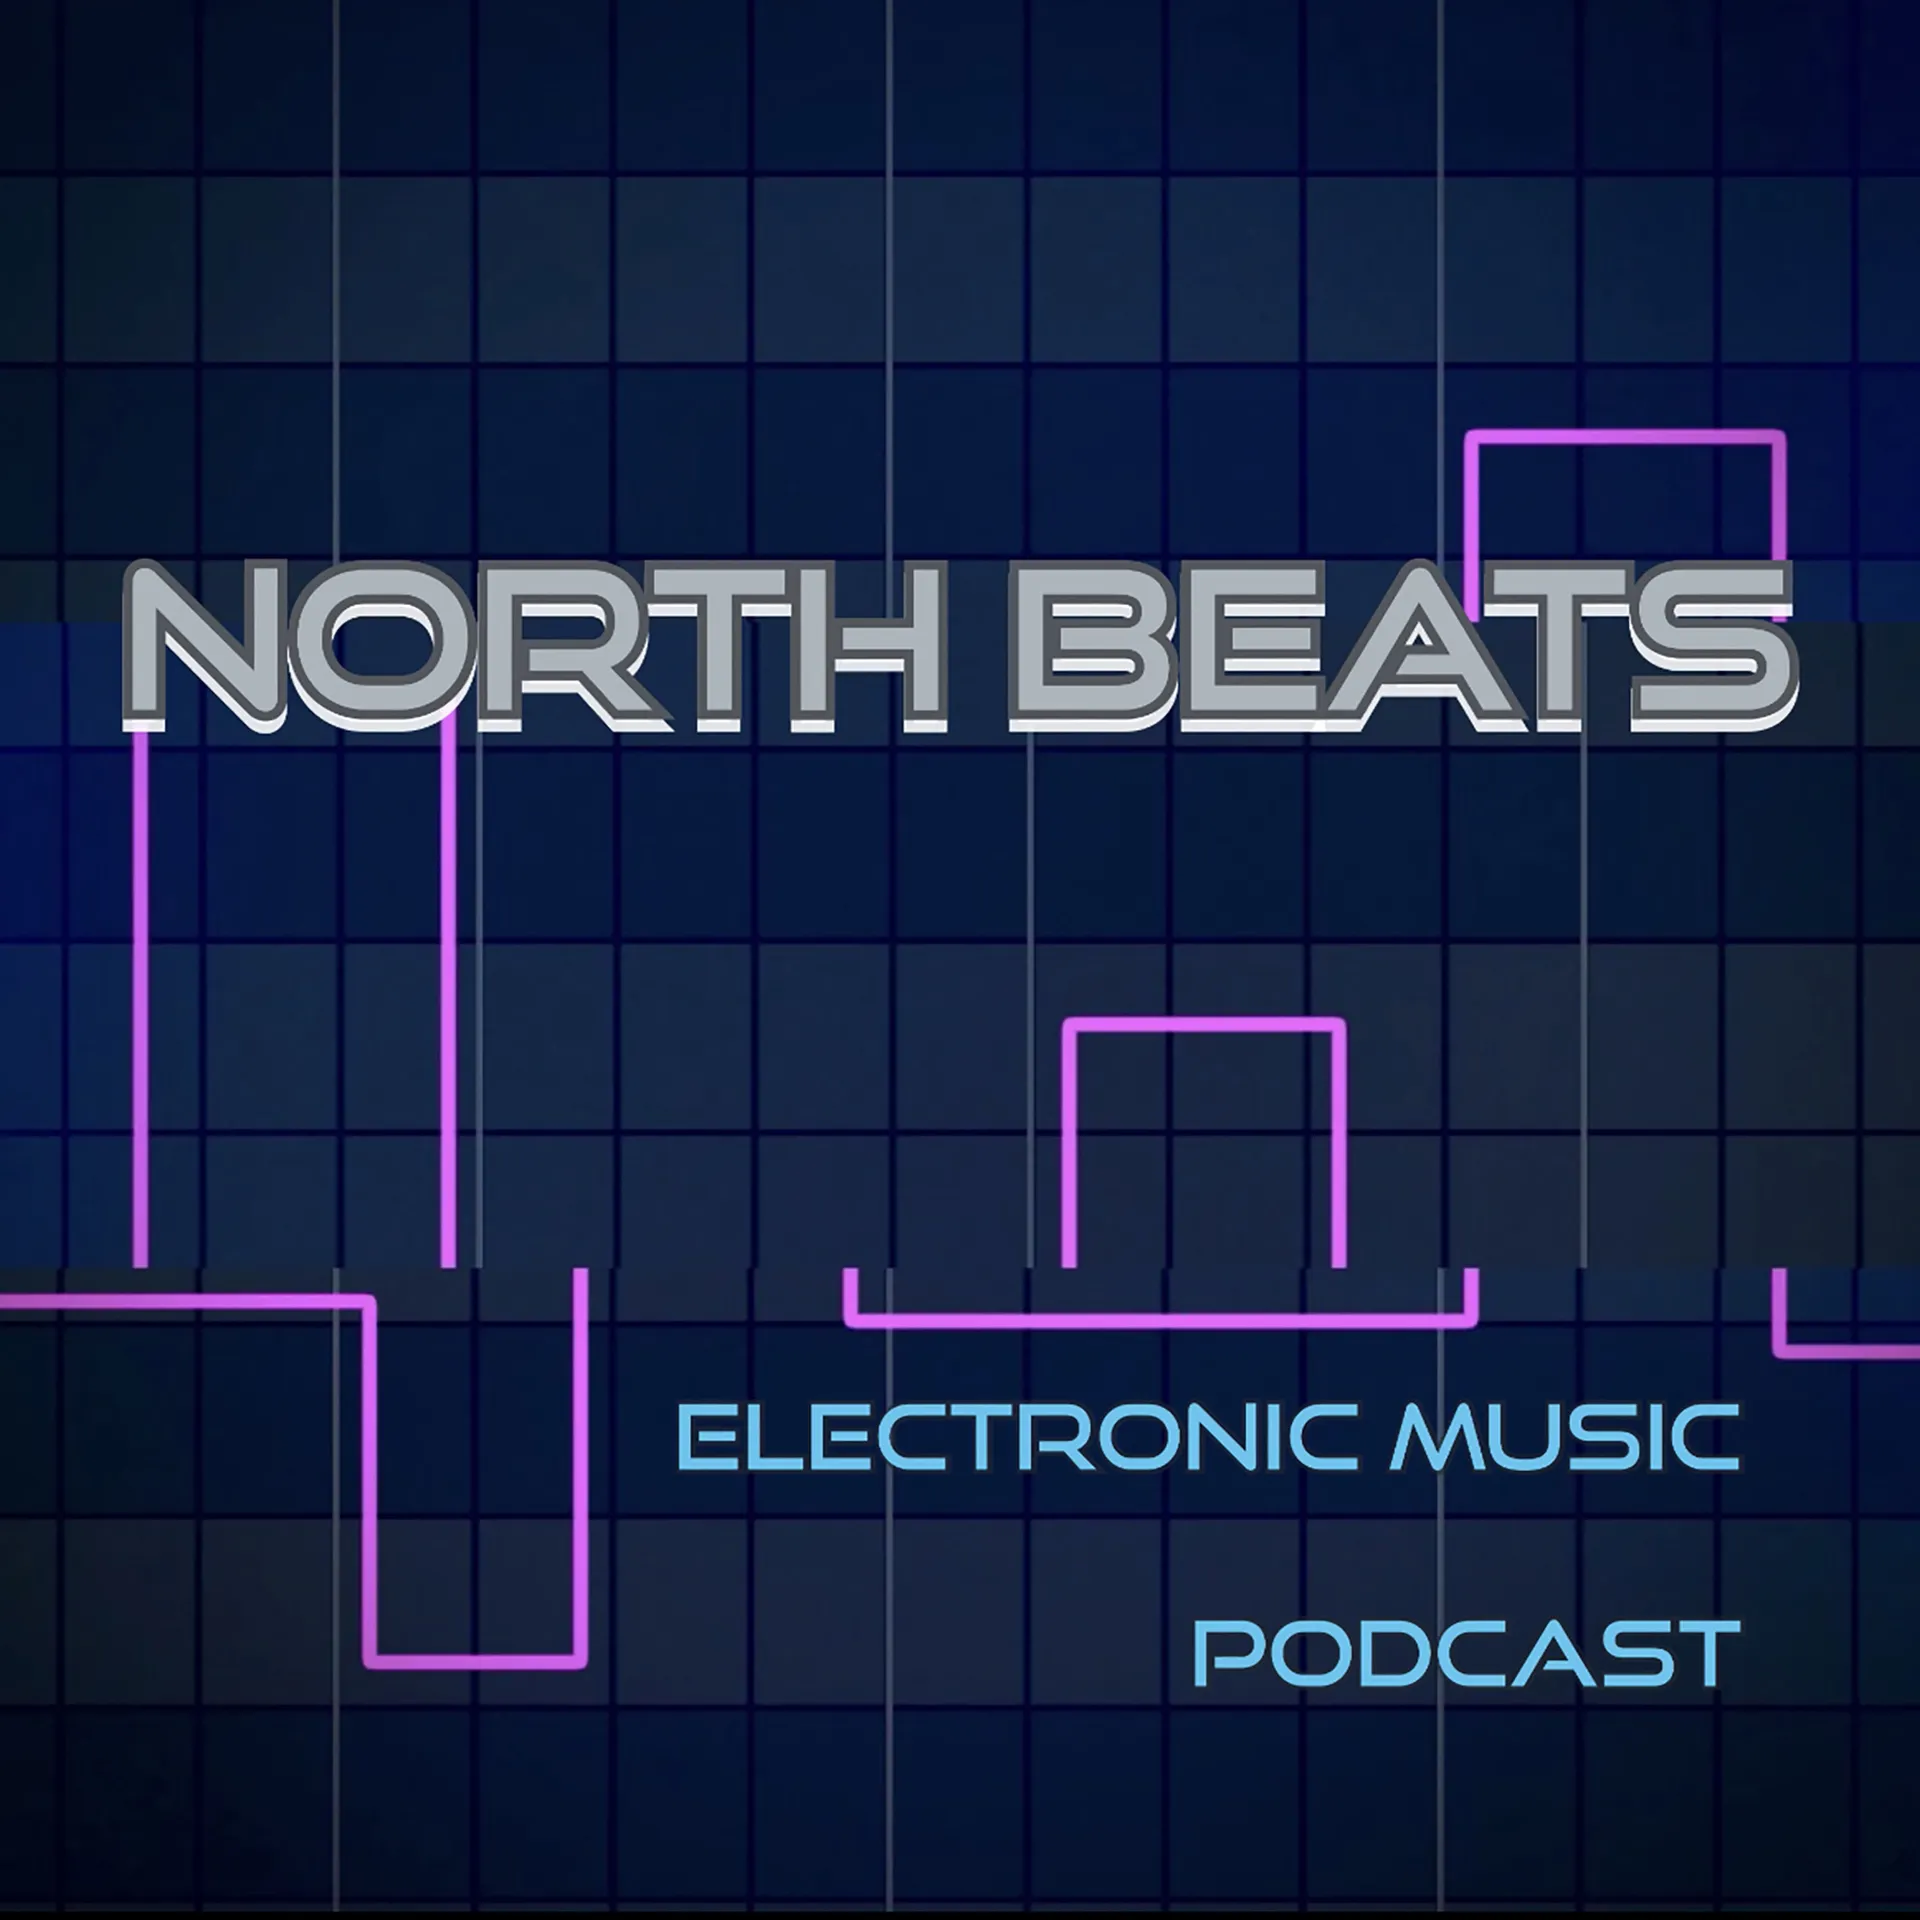 Rob Keen interview on North Beats podcast